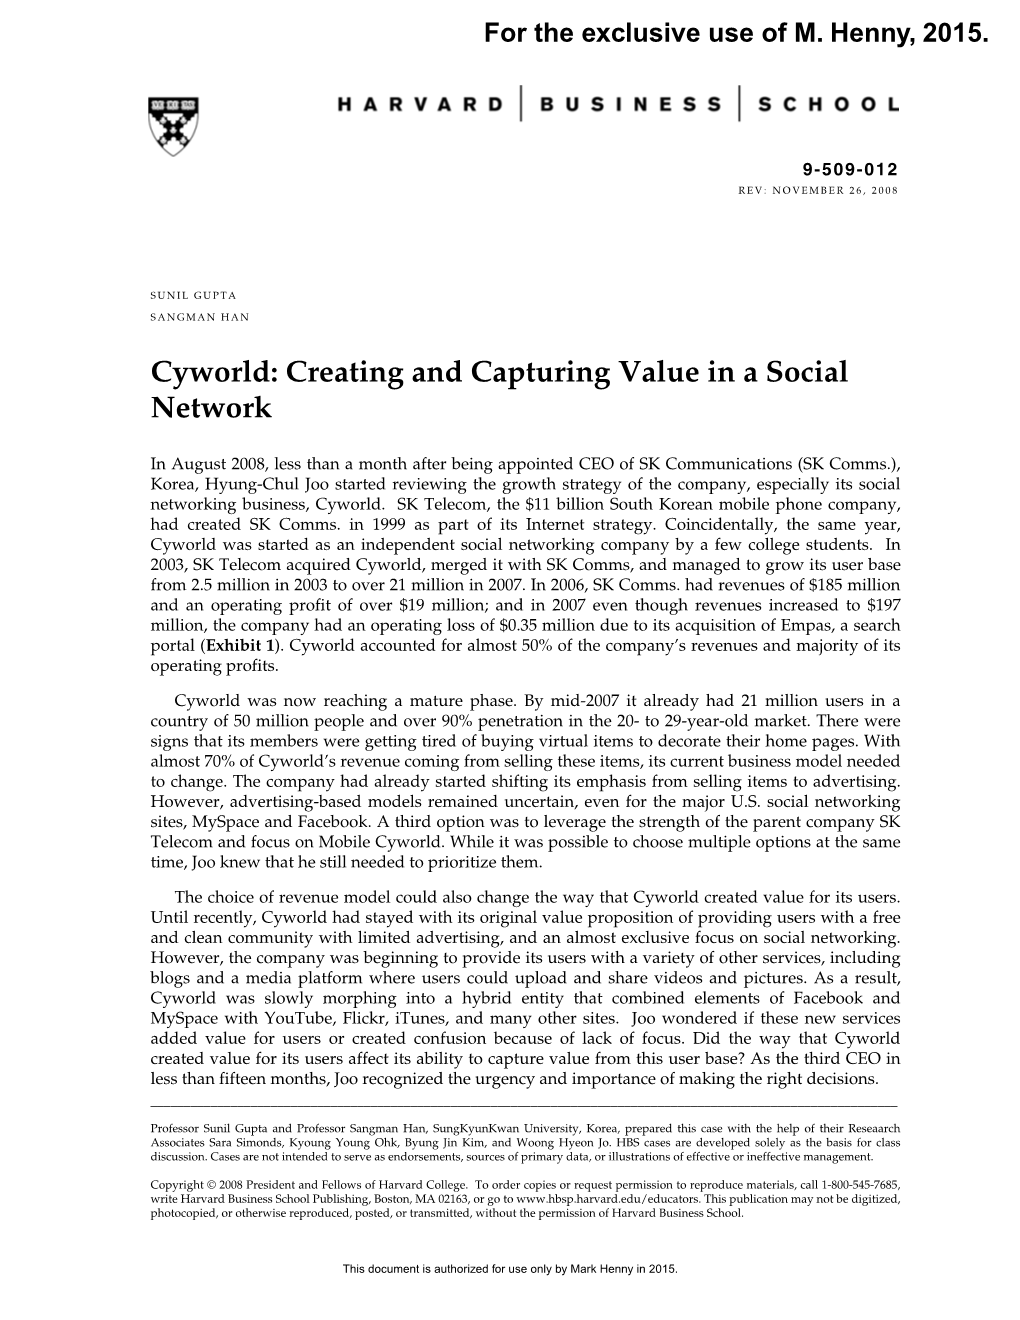 Cyworld: Creating and Capturing Value in a Social Network